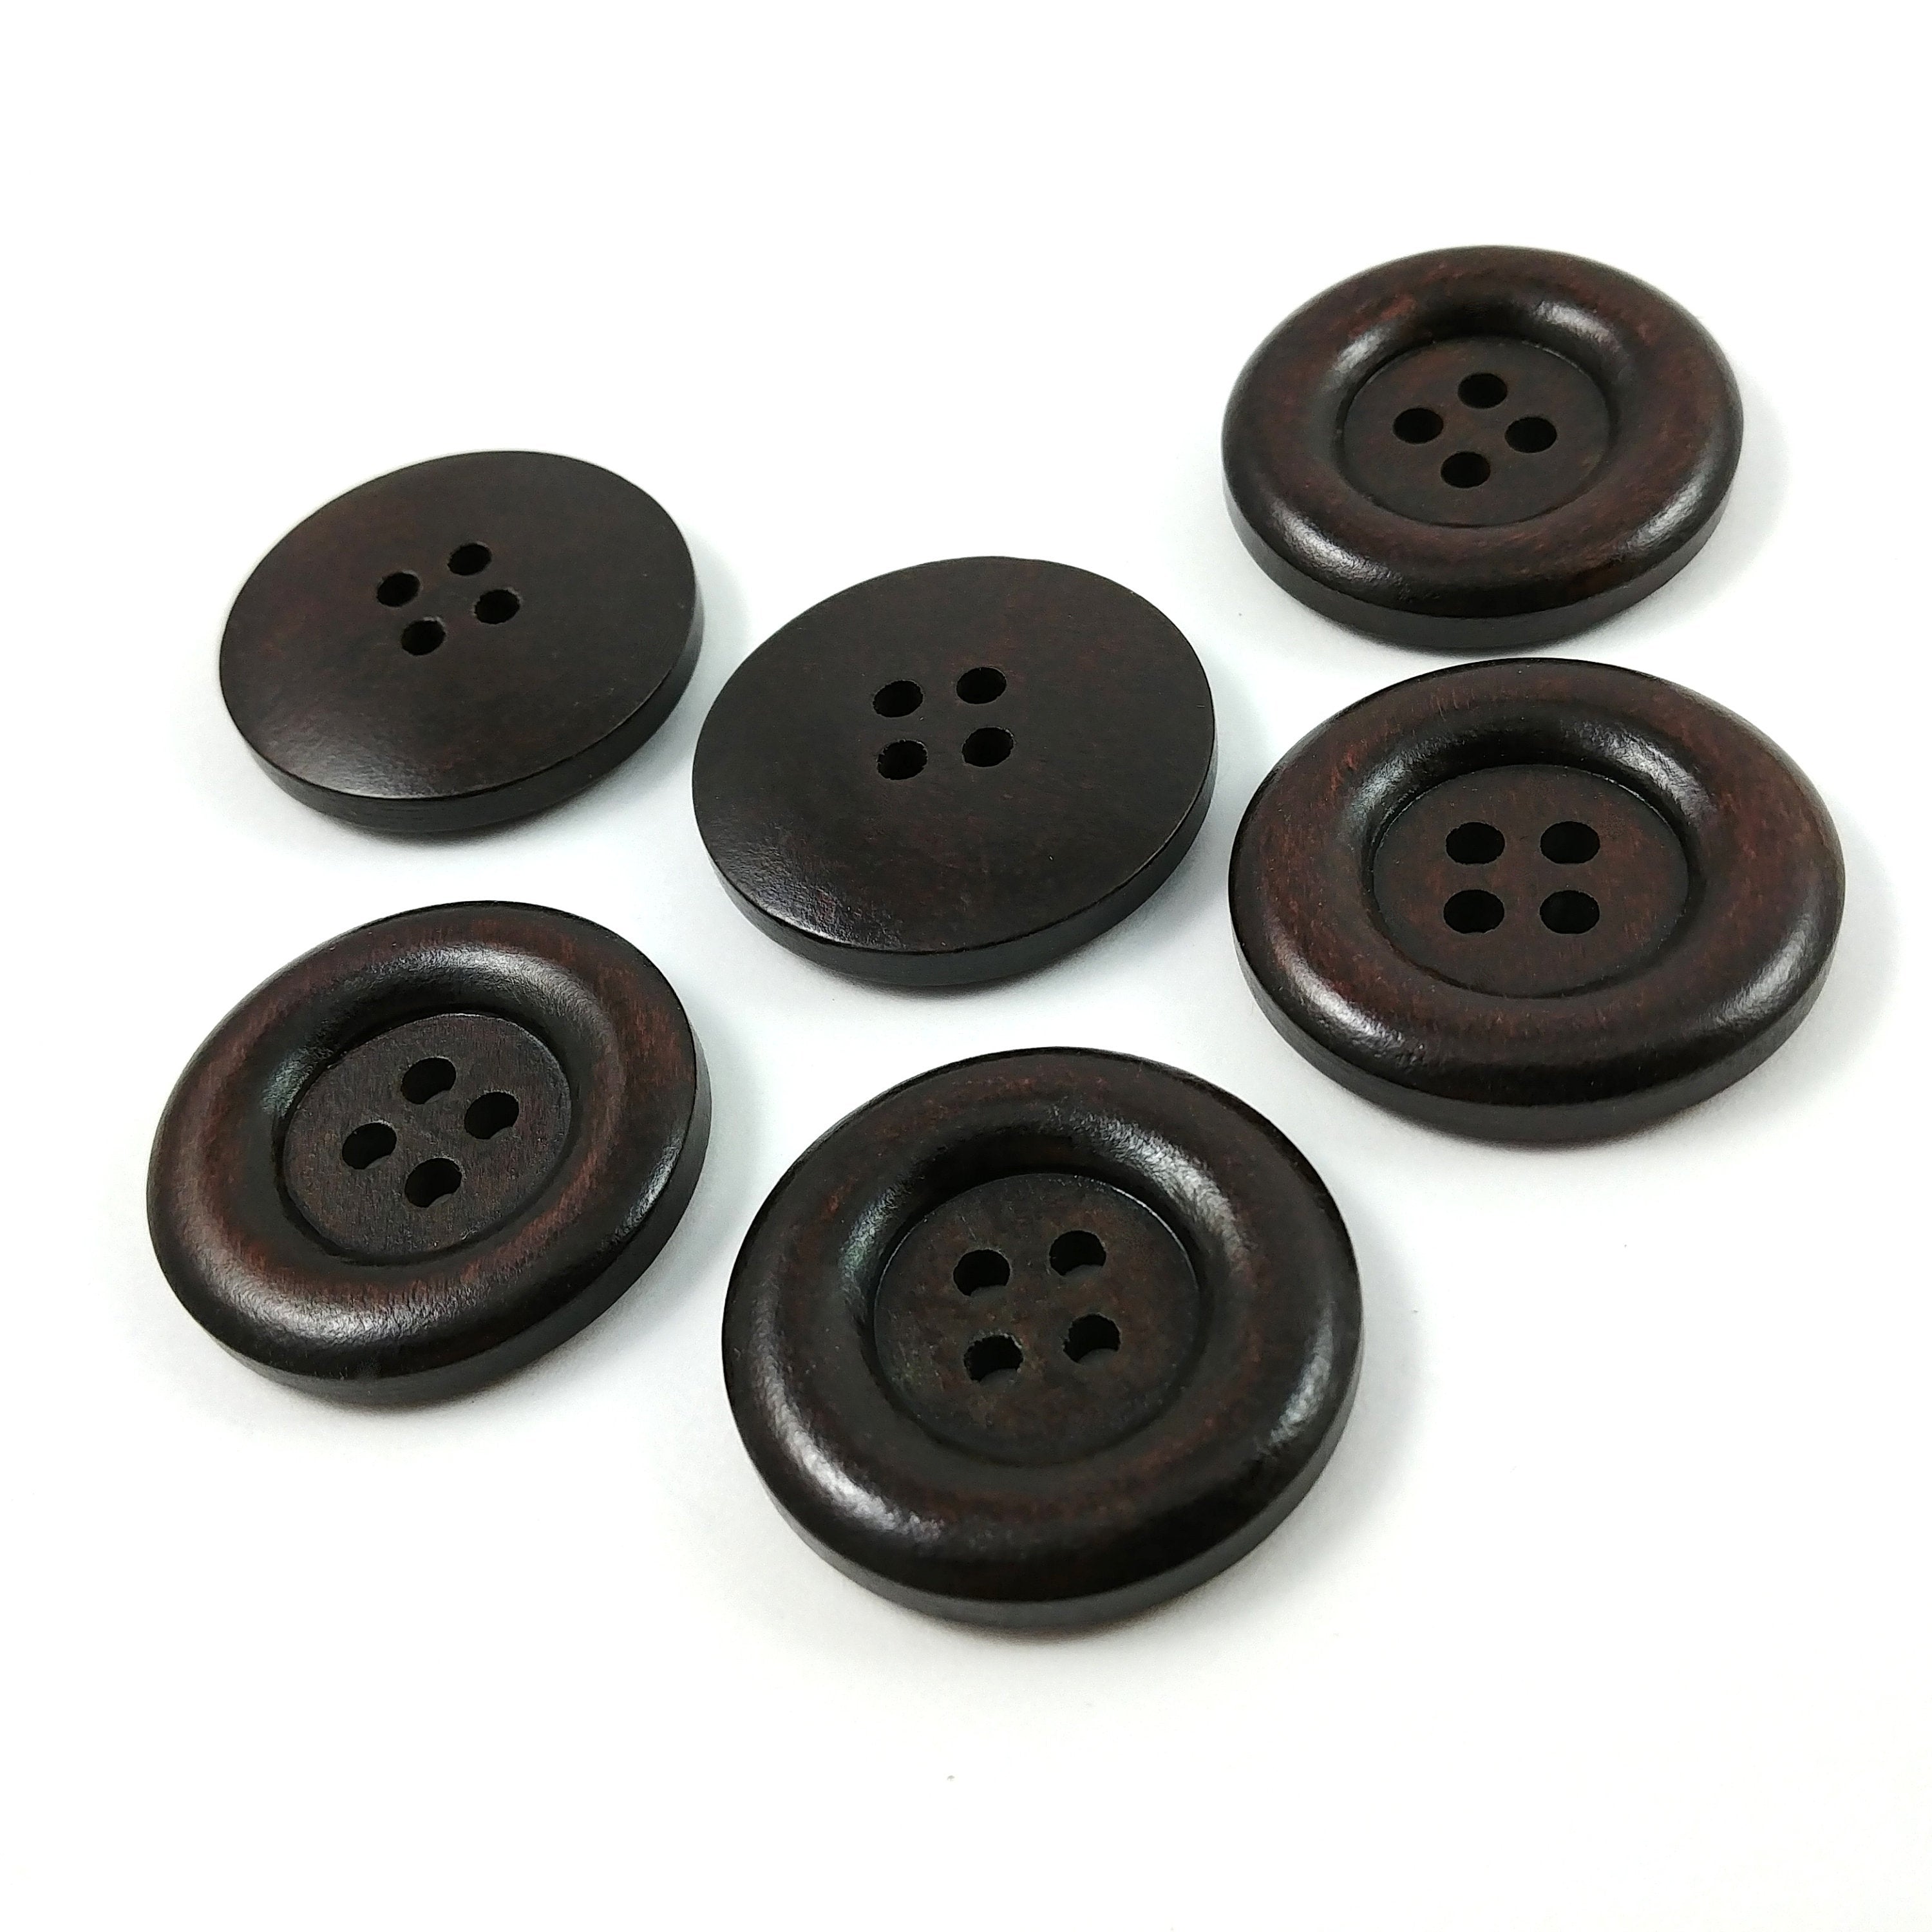 30mm Dark Wood buttons, sewing buttons - pack of 6